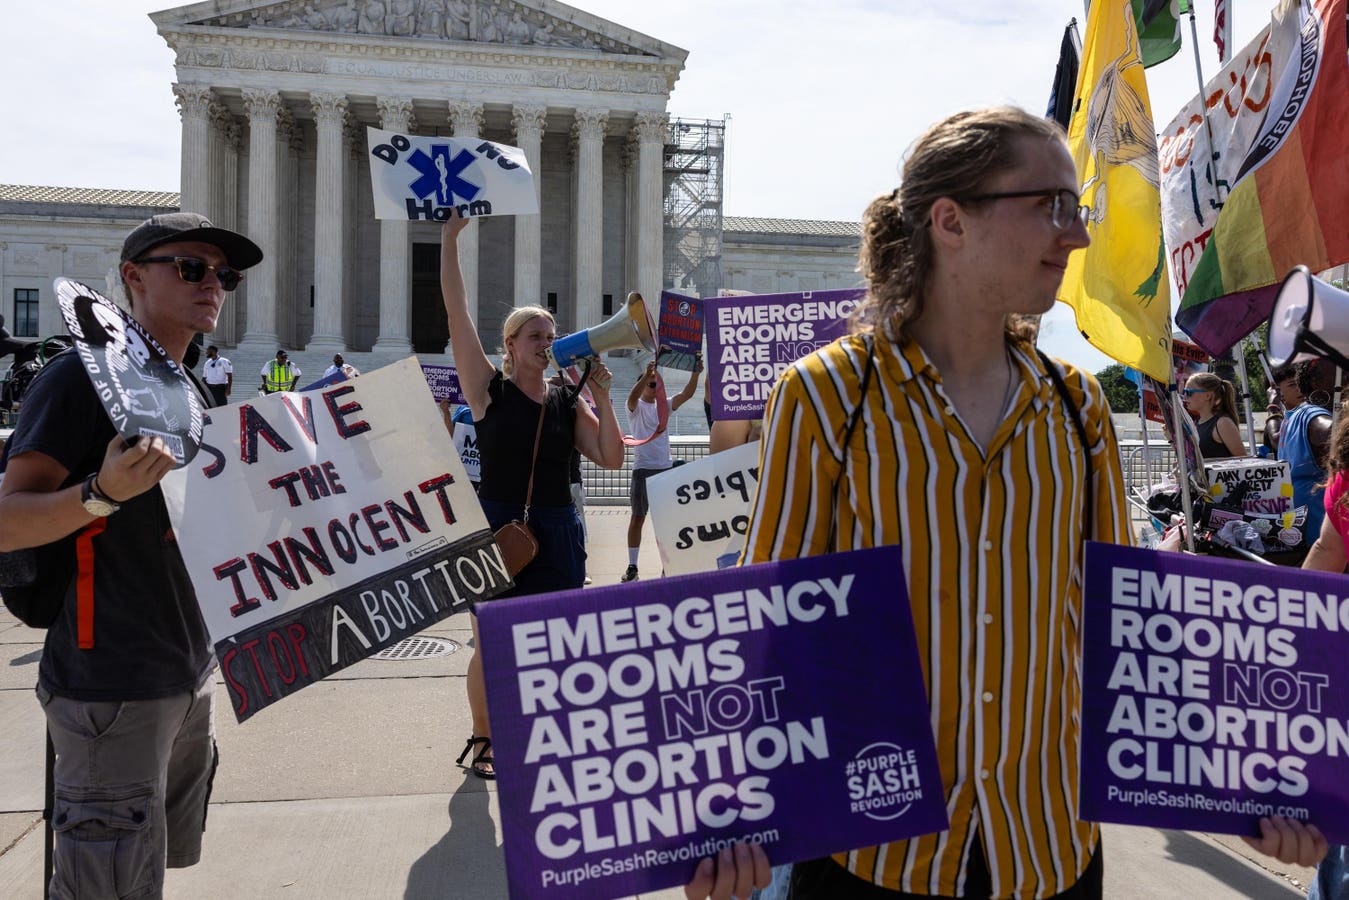 Supreme Court Abortion Decision Leaves Patients And Doctors In Limbo